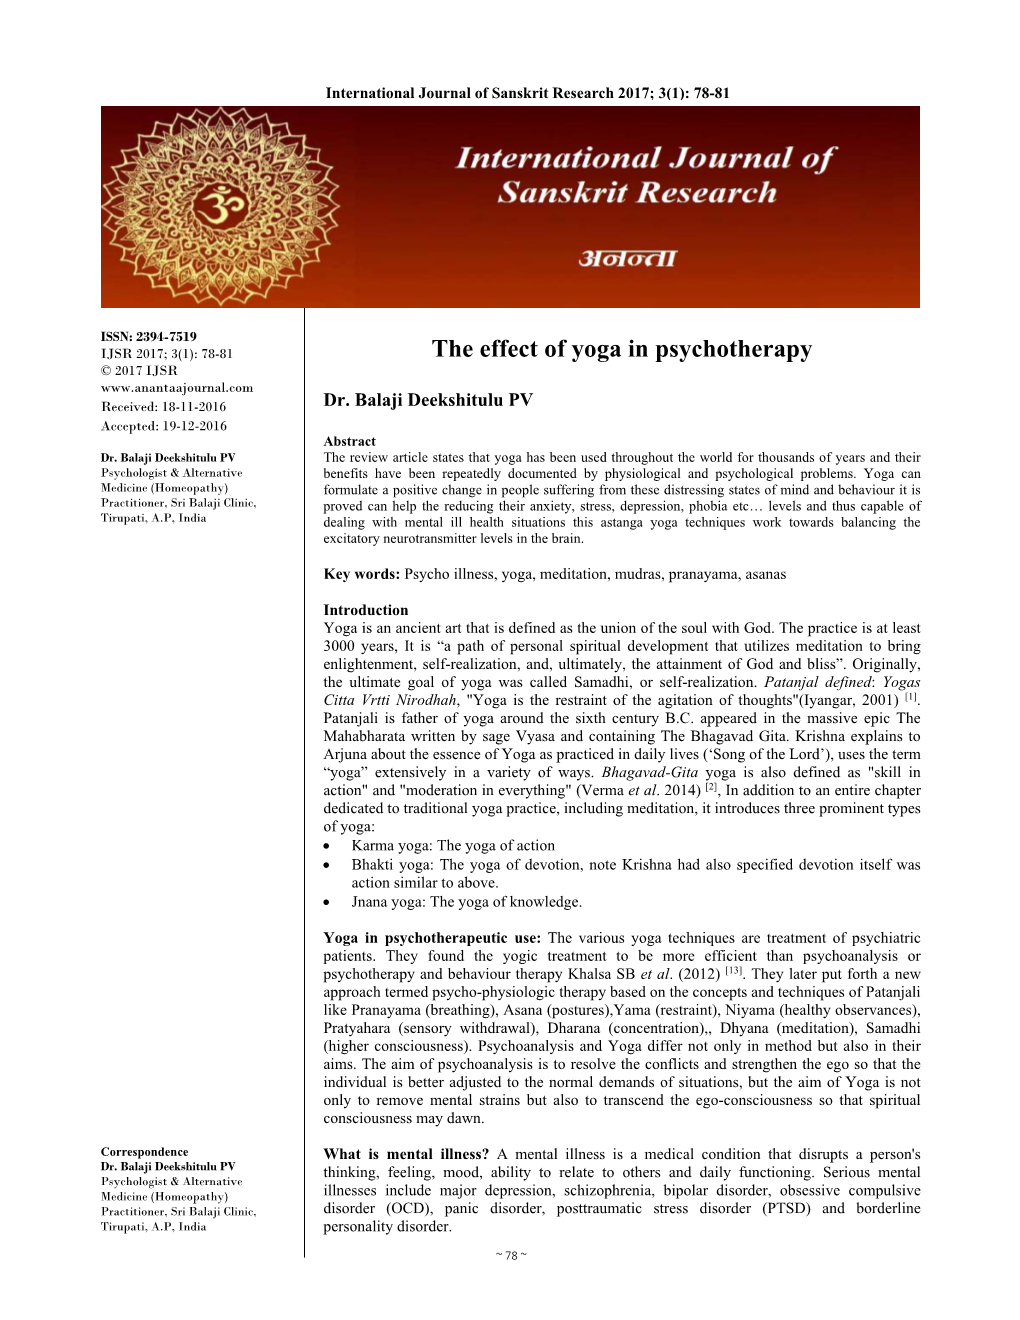 The Effect of Yoga in Psychotherapy © 2017 IJSR Dr